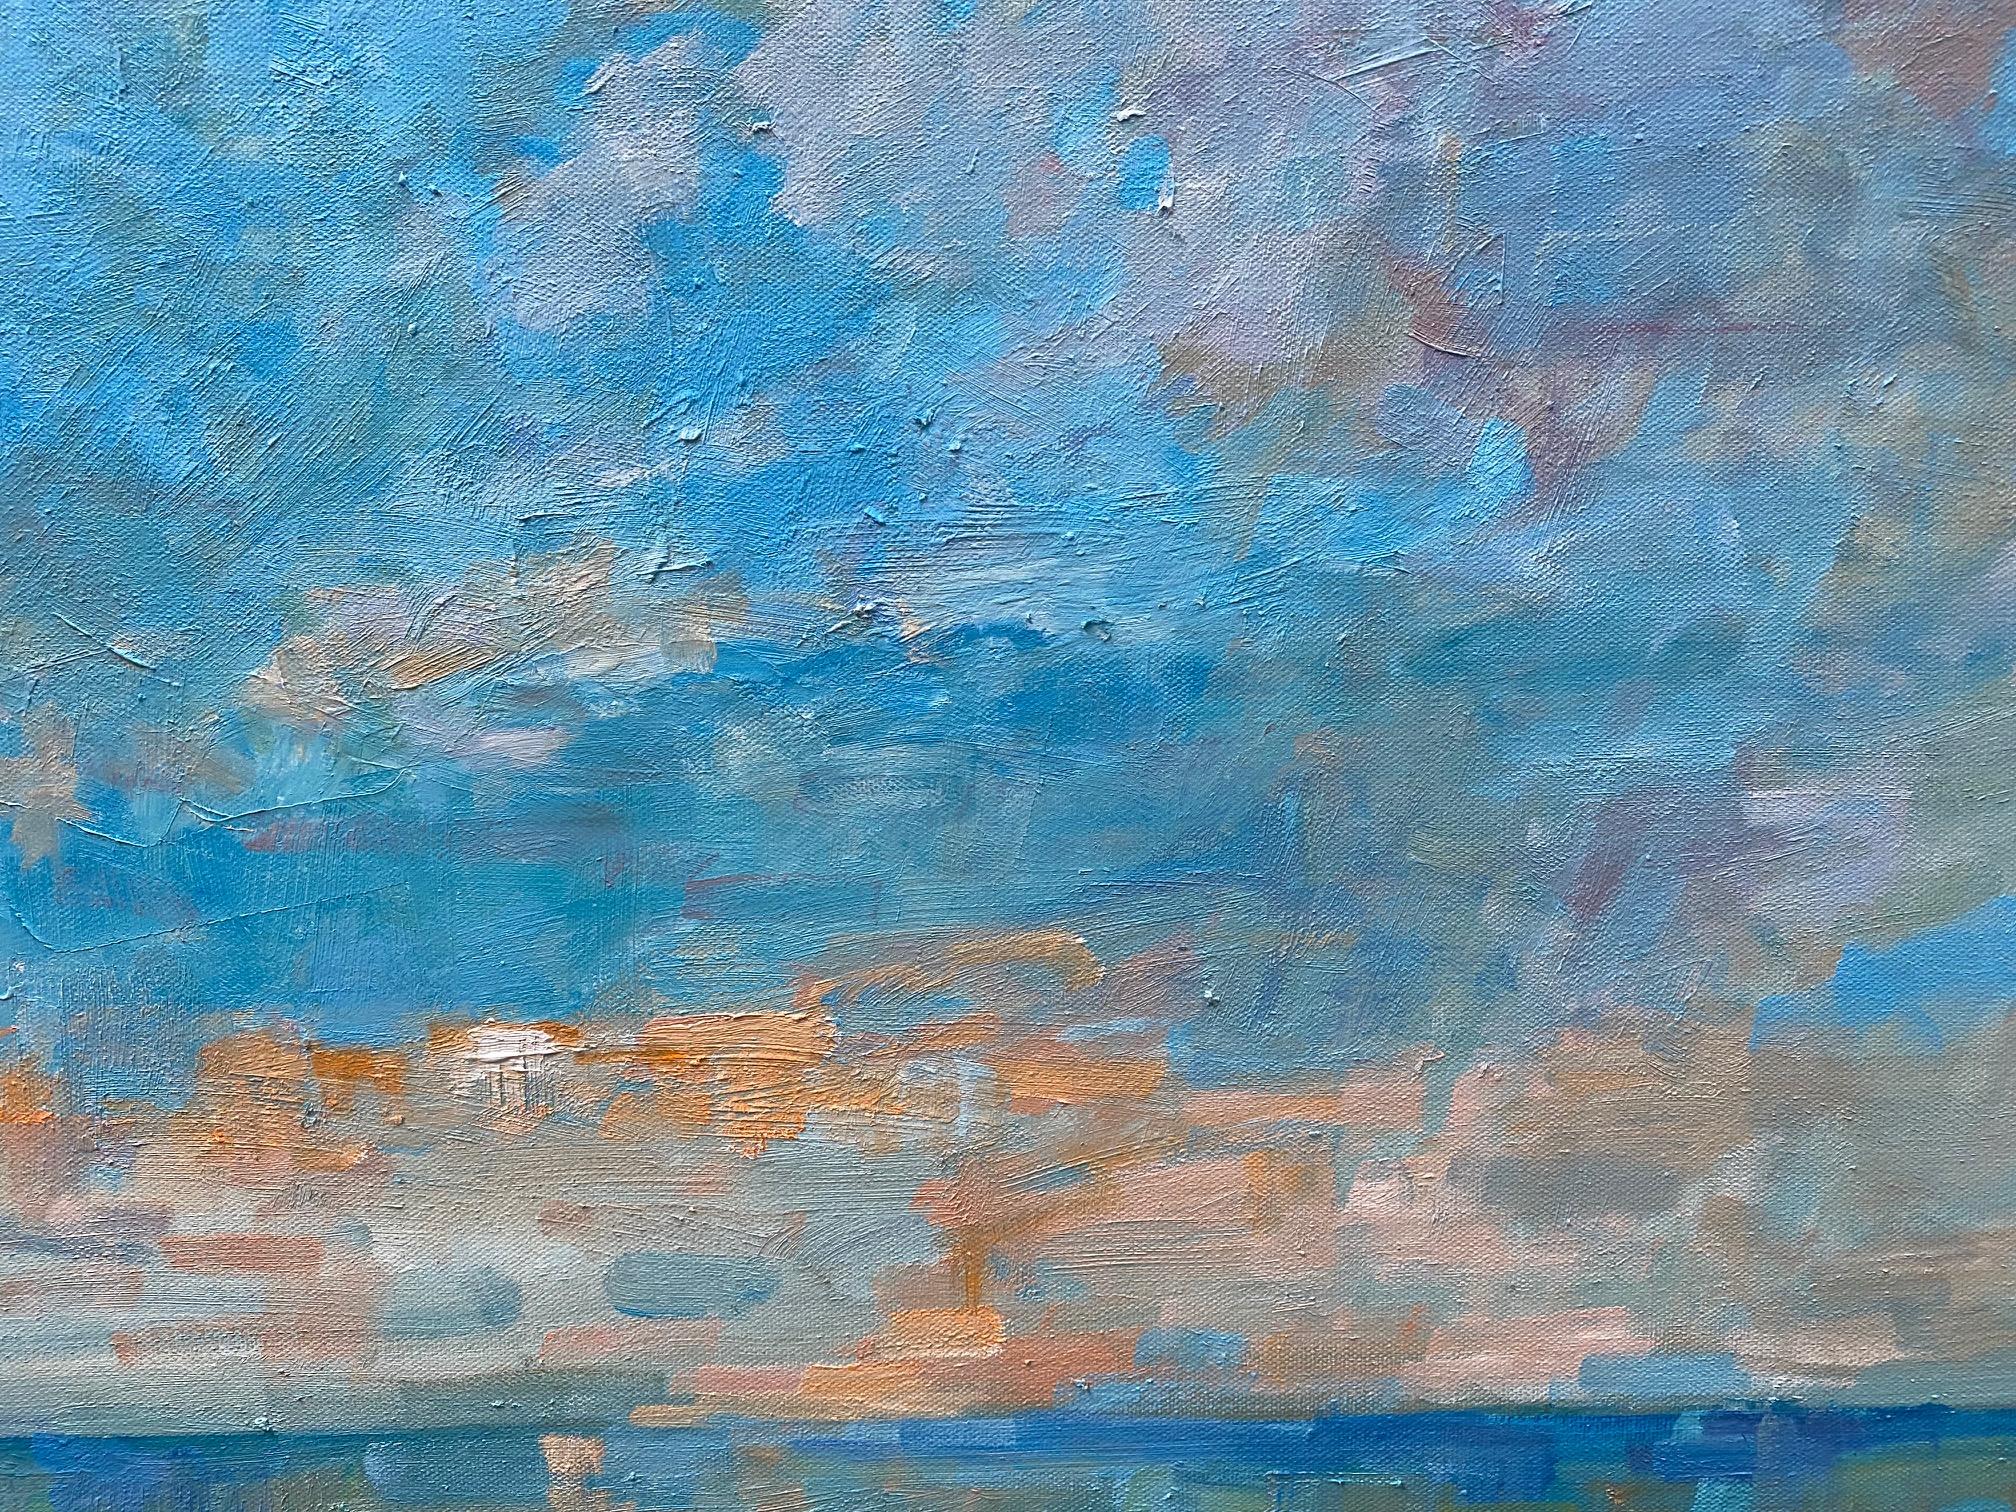 How wonder filled it is to witness the natural beauty of a sunrise over the ocean on one of those blessed early summer mornings.  You feel the ocean amidst while luxuriating in the dense aqua and apricot sky.  This 26x 32 abstract original oil